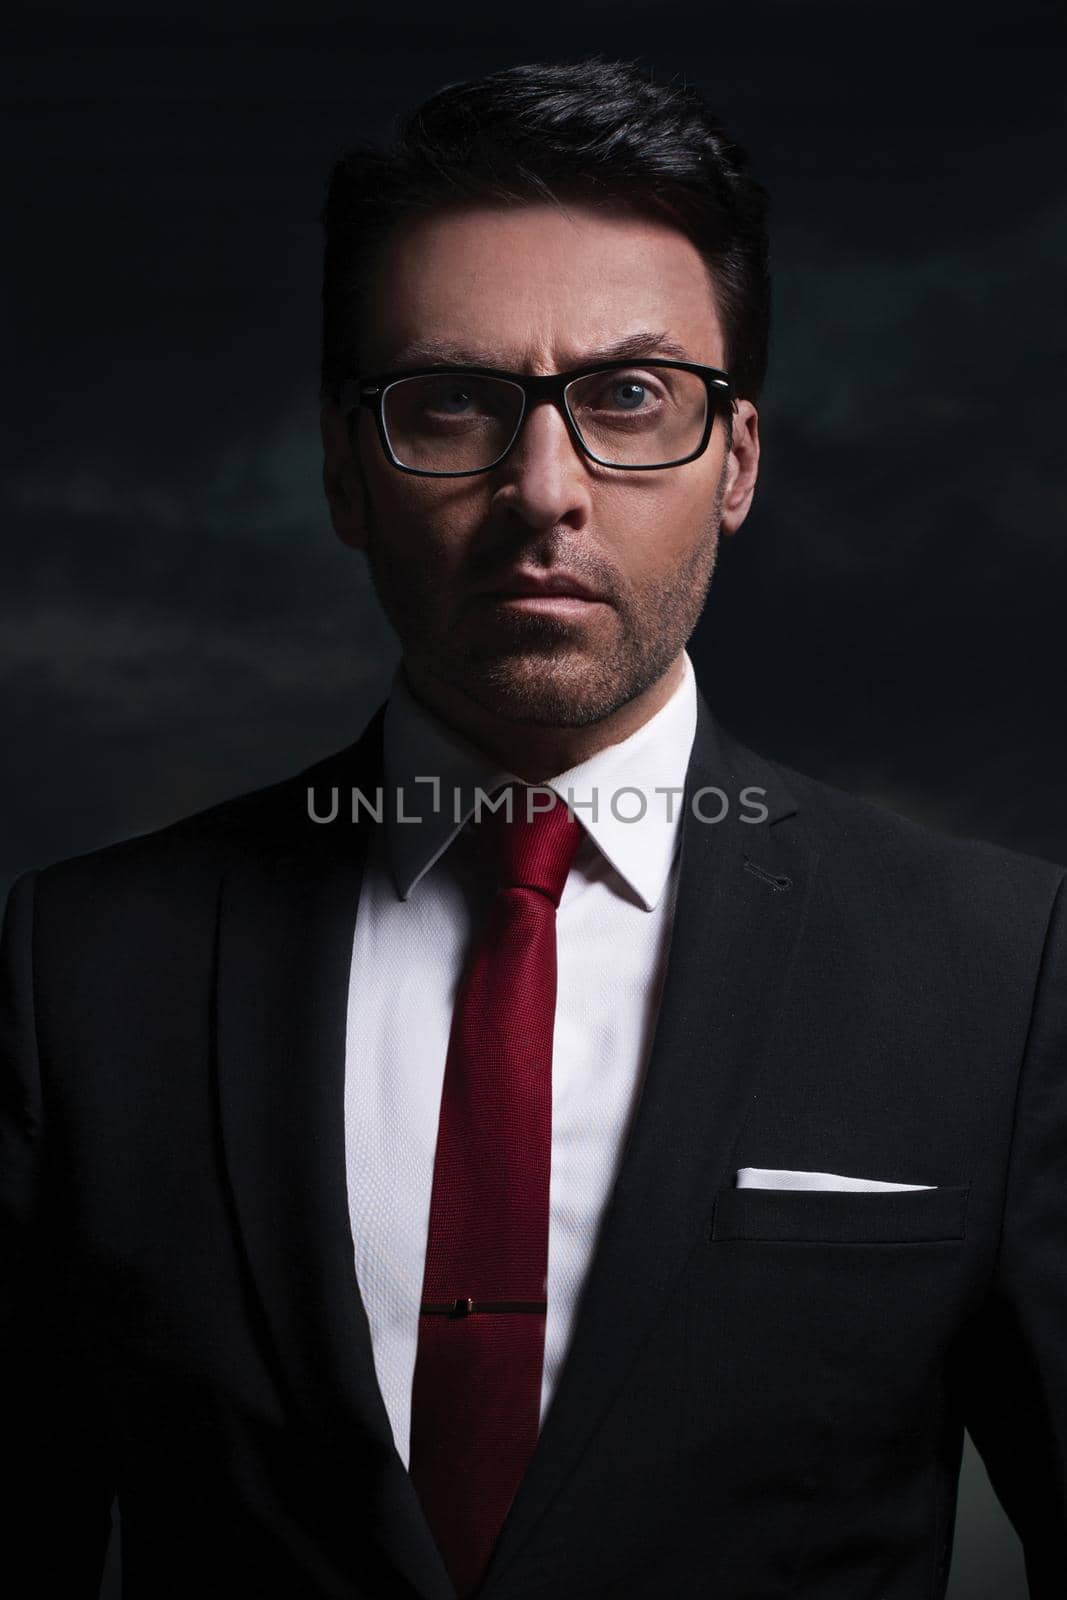 close up.portrait of a serious businessman by asdf